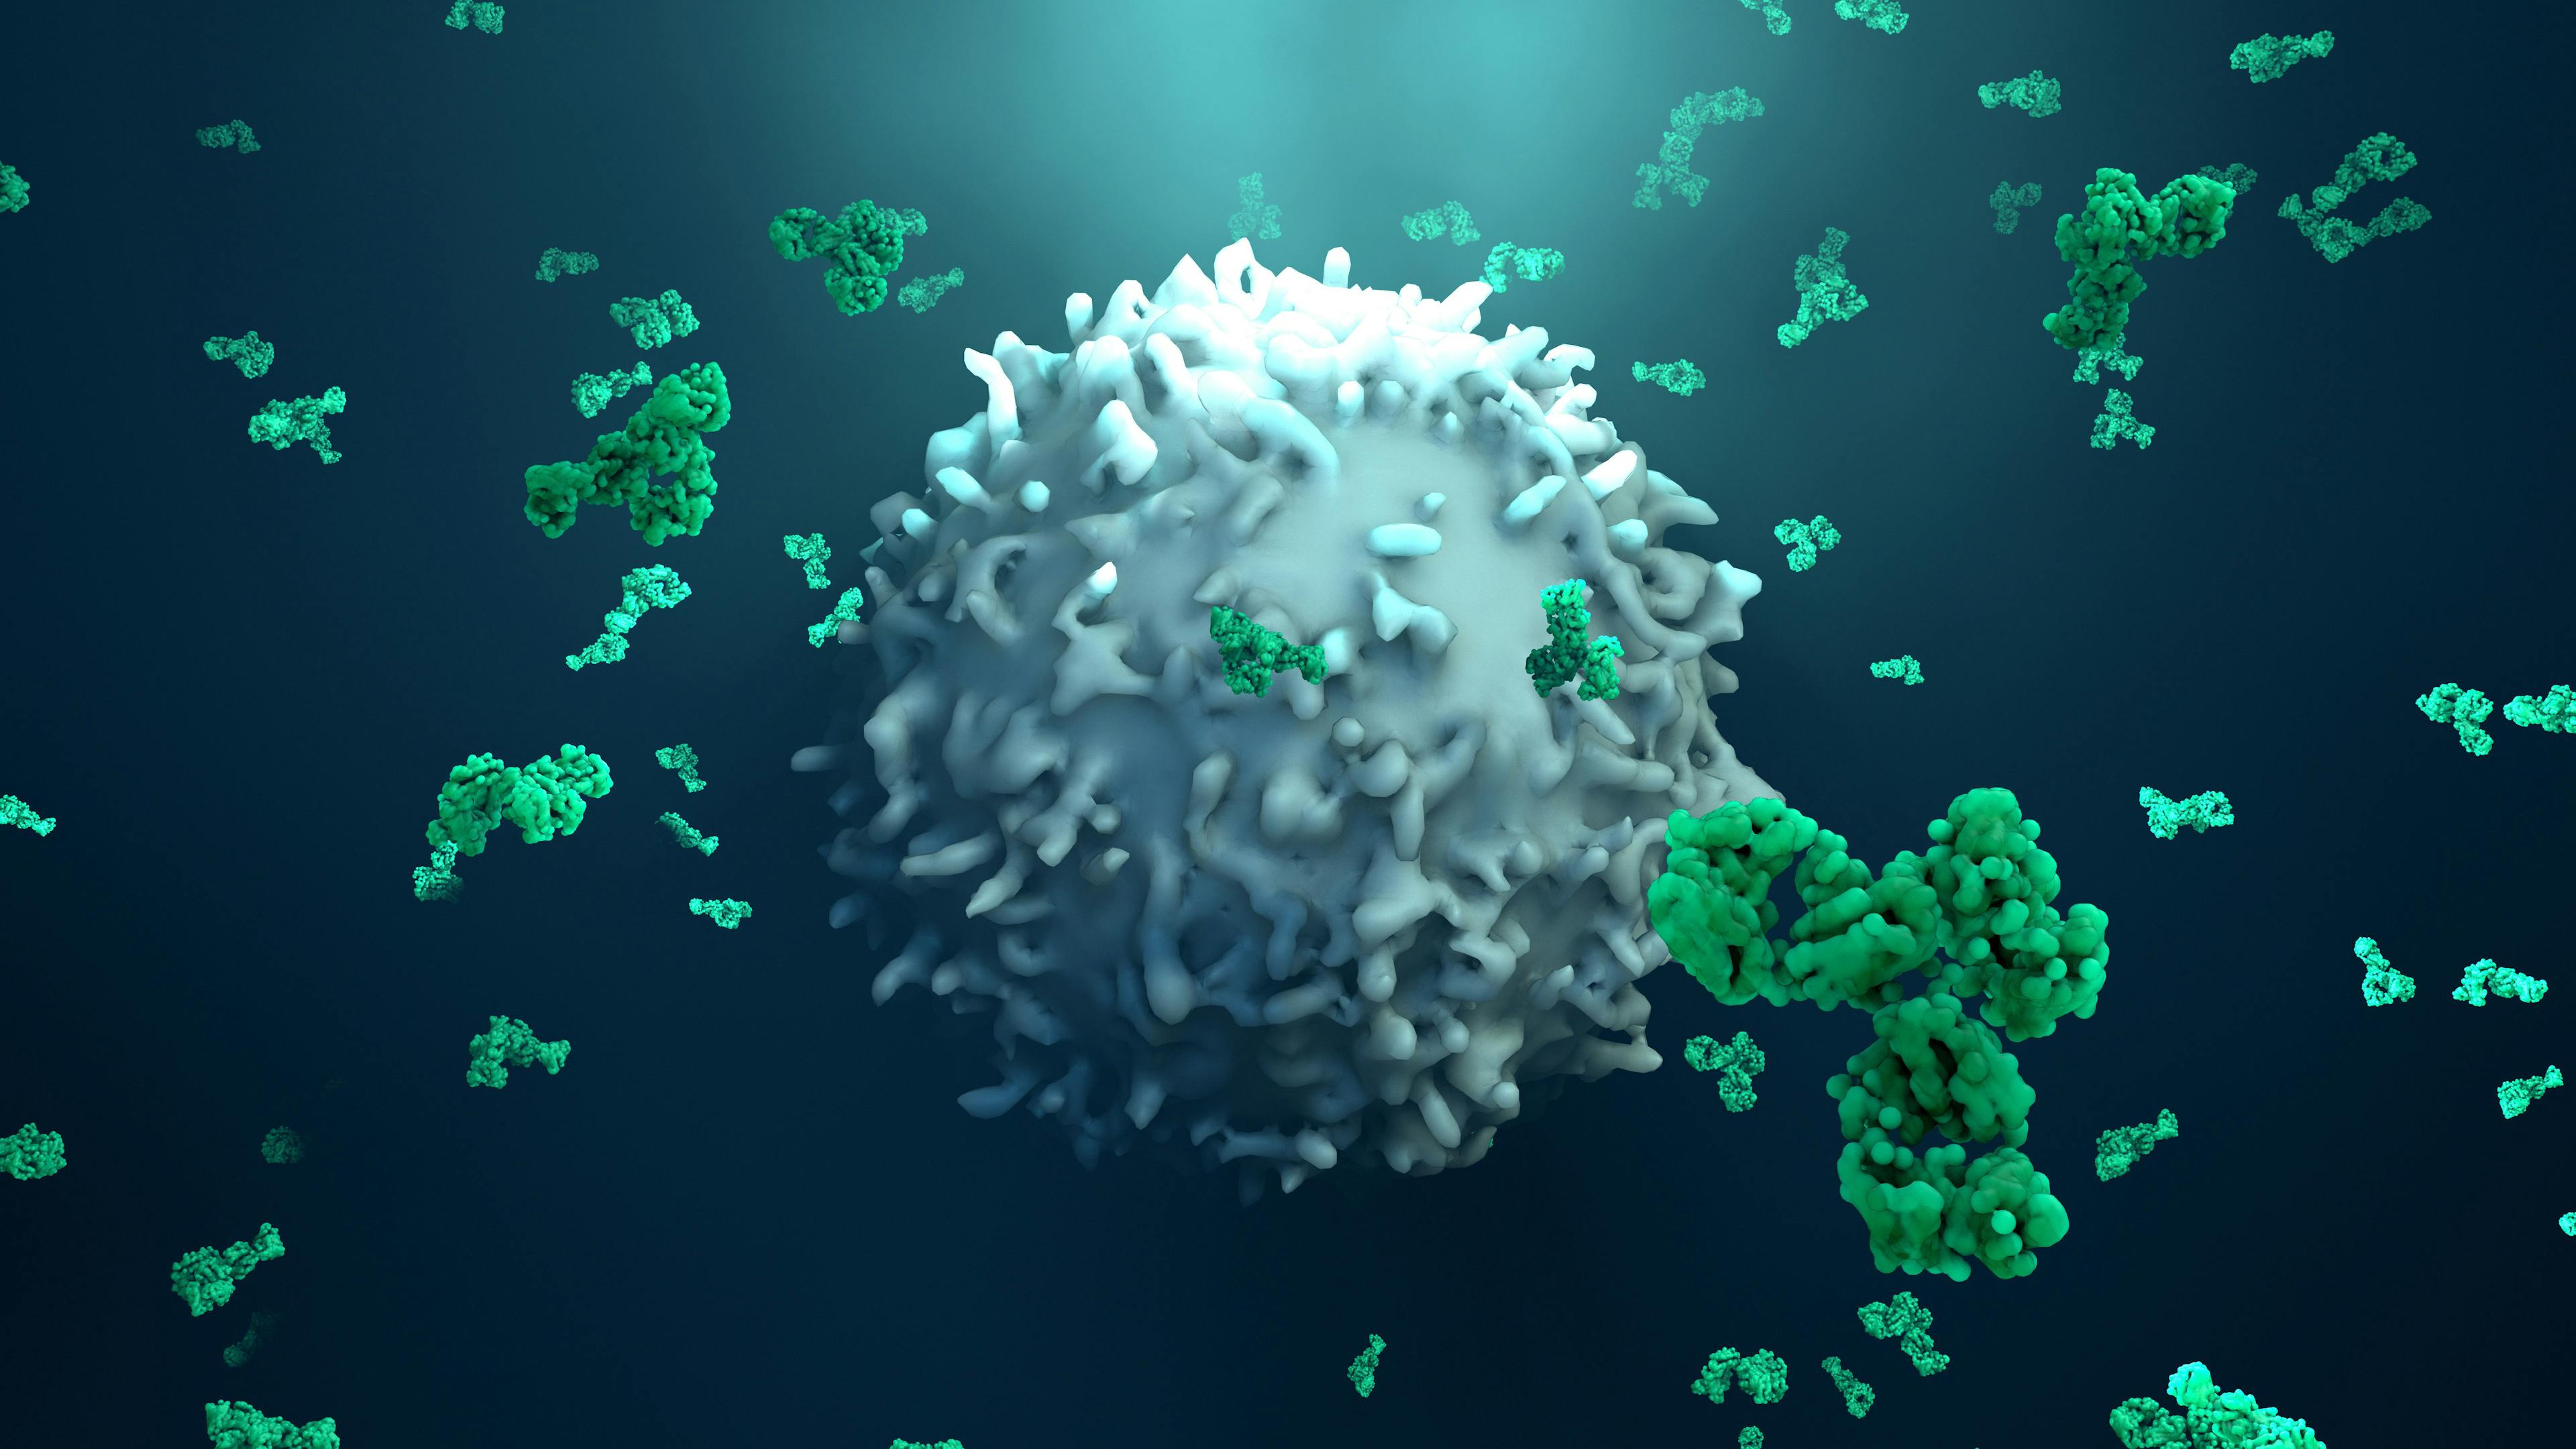 Antibodies attack a cancer cell or virus | Image Credit: Design Cells - stock.adobe.com